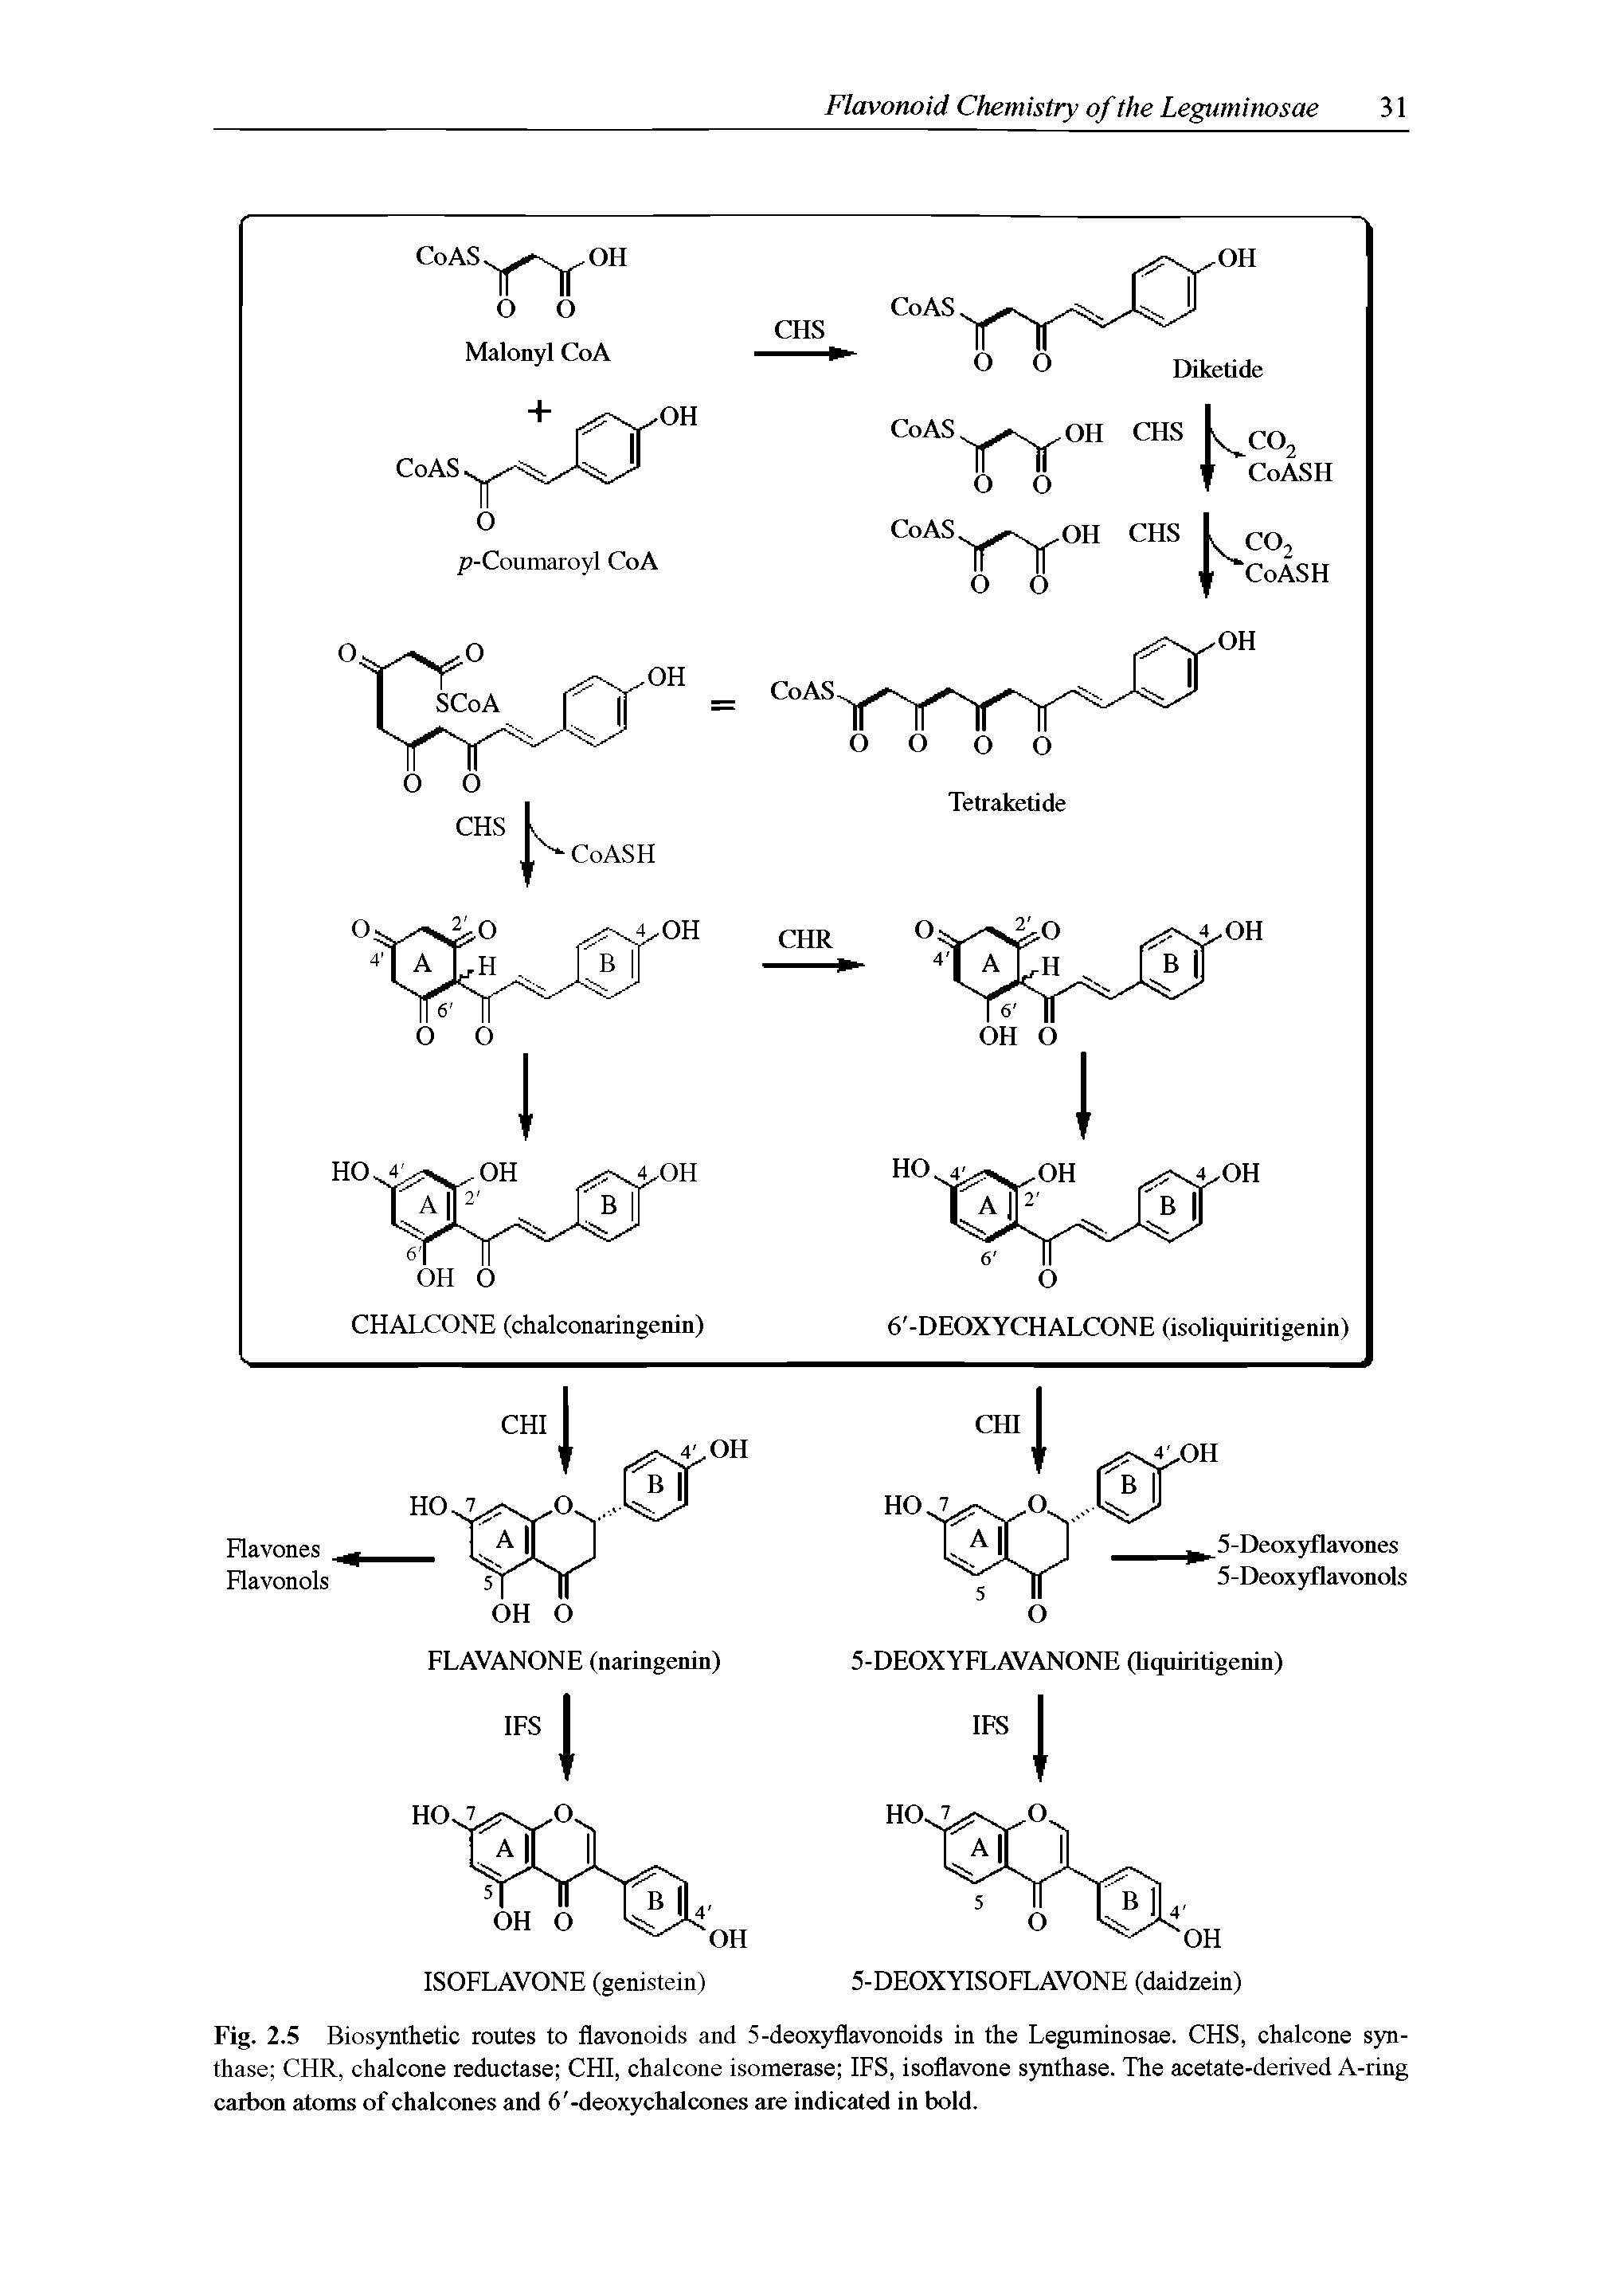 Fig. 2.5 Biosynthetic routes to flavonoids and 5-deoxyflavonoids in the Leguminosae. CHS, chalcone synthase CHR, chalcone reductase CHI, chalcone isomerase IFS, isoflavone synthase. The acetate-derived A-ring carbon atoms of chalcones and 6 -deoxychalcones are indicated in bold.